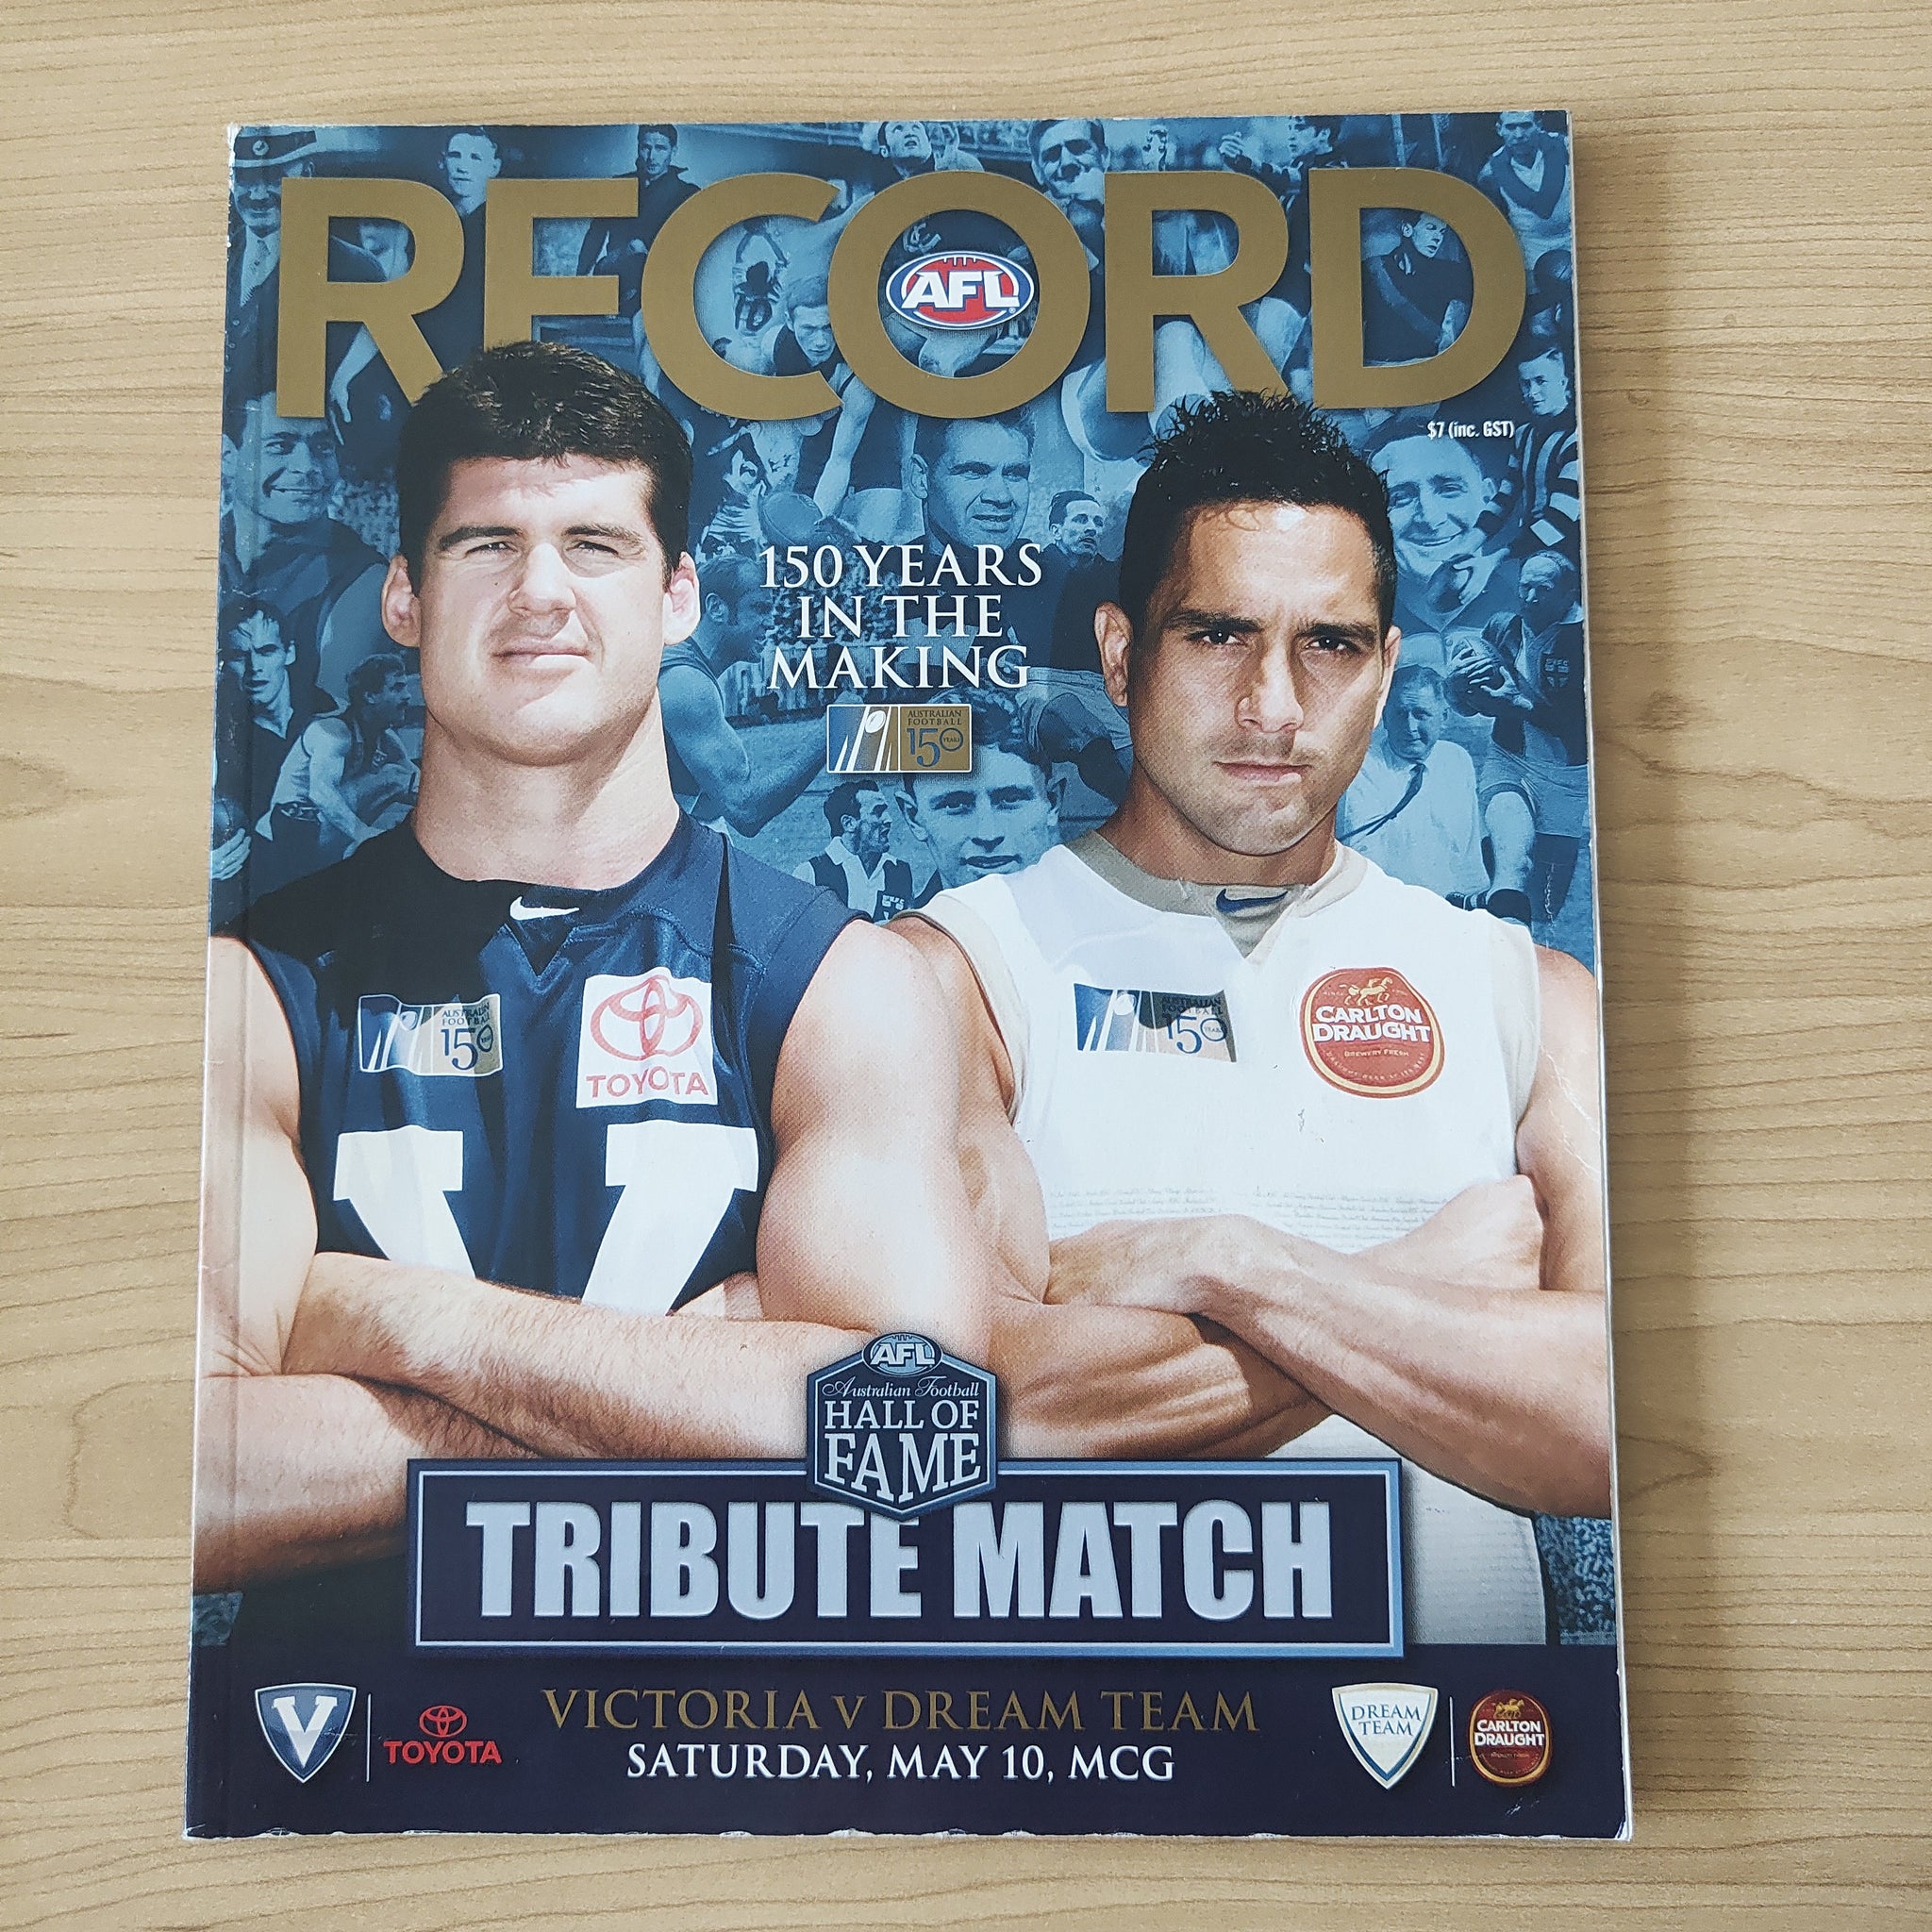 2008 May 10 Hall Of Fame Tribute Match Victoria v Dream Team Football Record